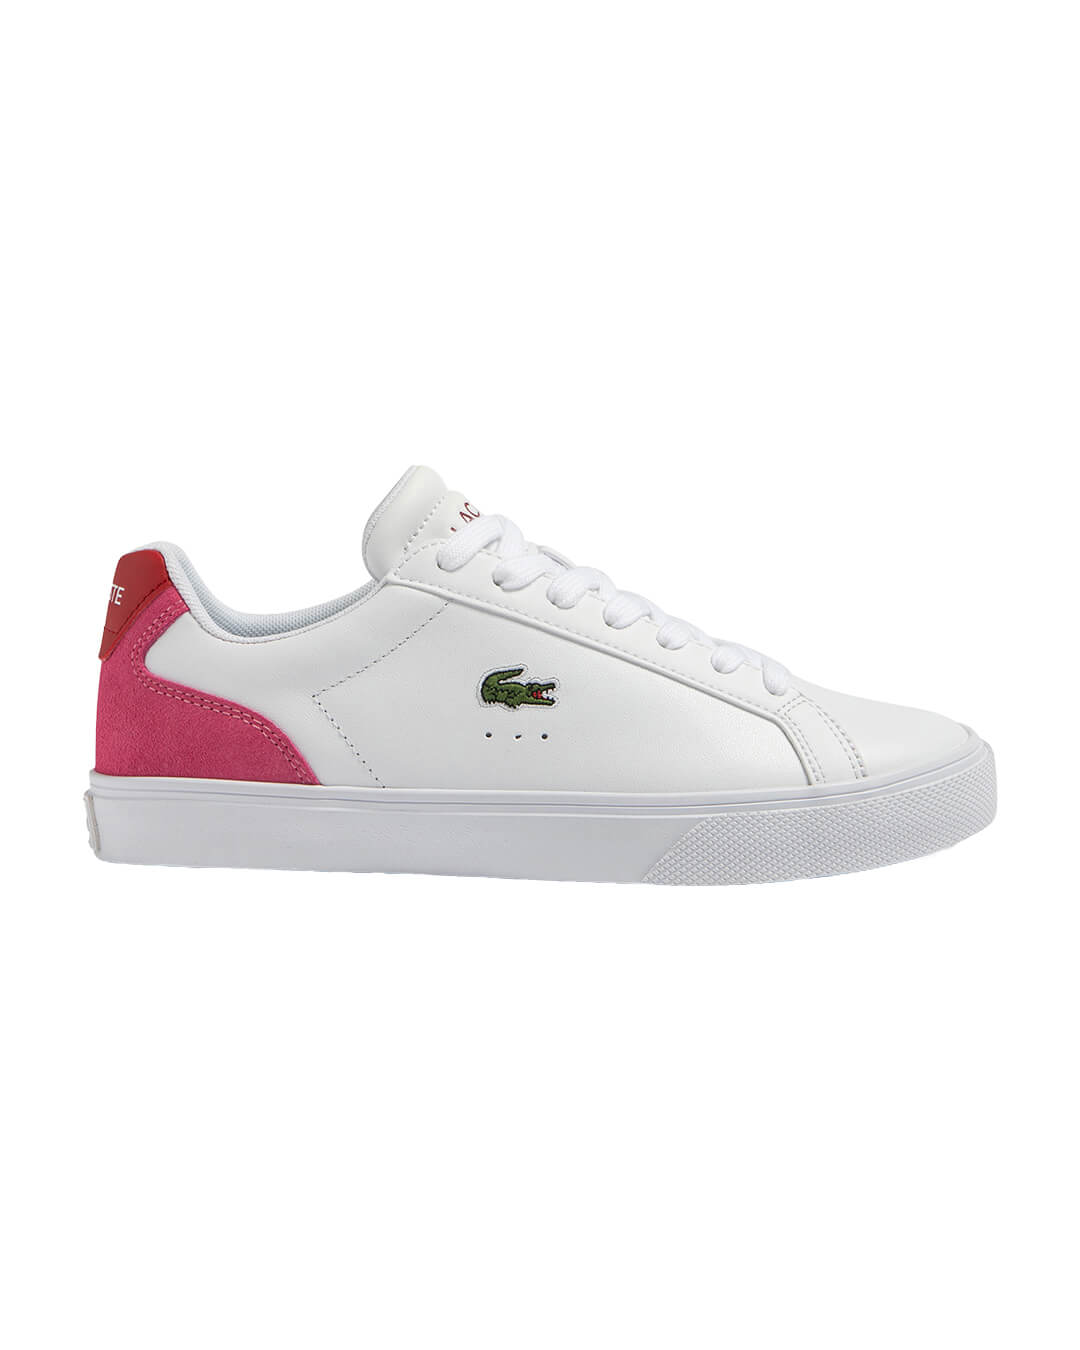 Lacoste Shoes Lacoste Lerond Pro Leather Heel Pop White Sneakers